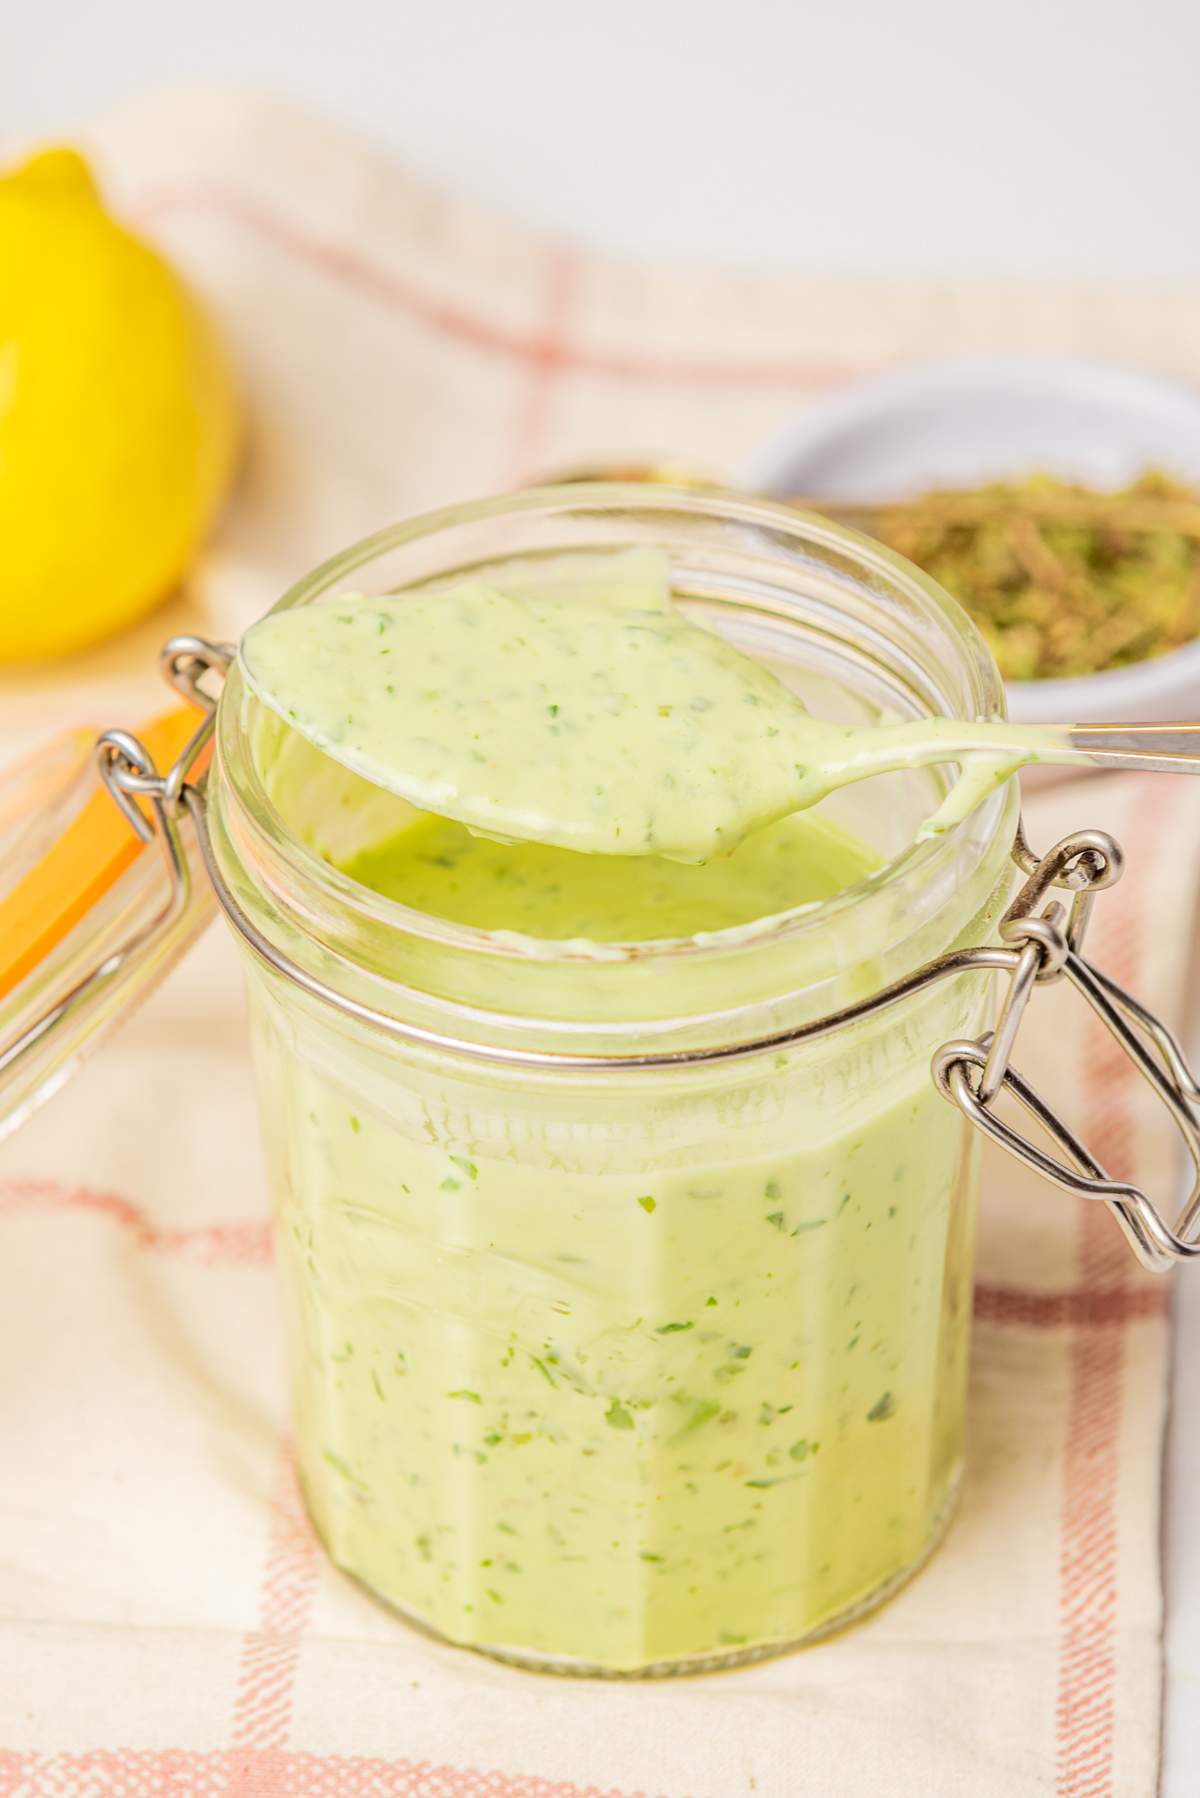 green goddess dressing in a jar with lid and a spoon with some dressing over the jar